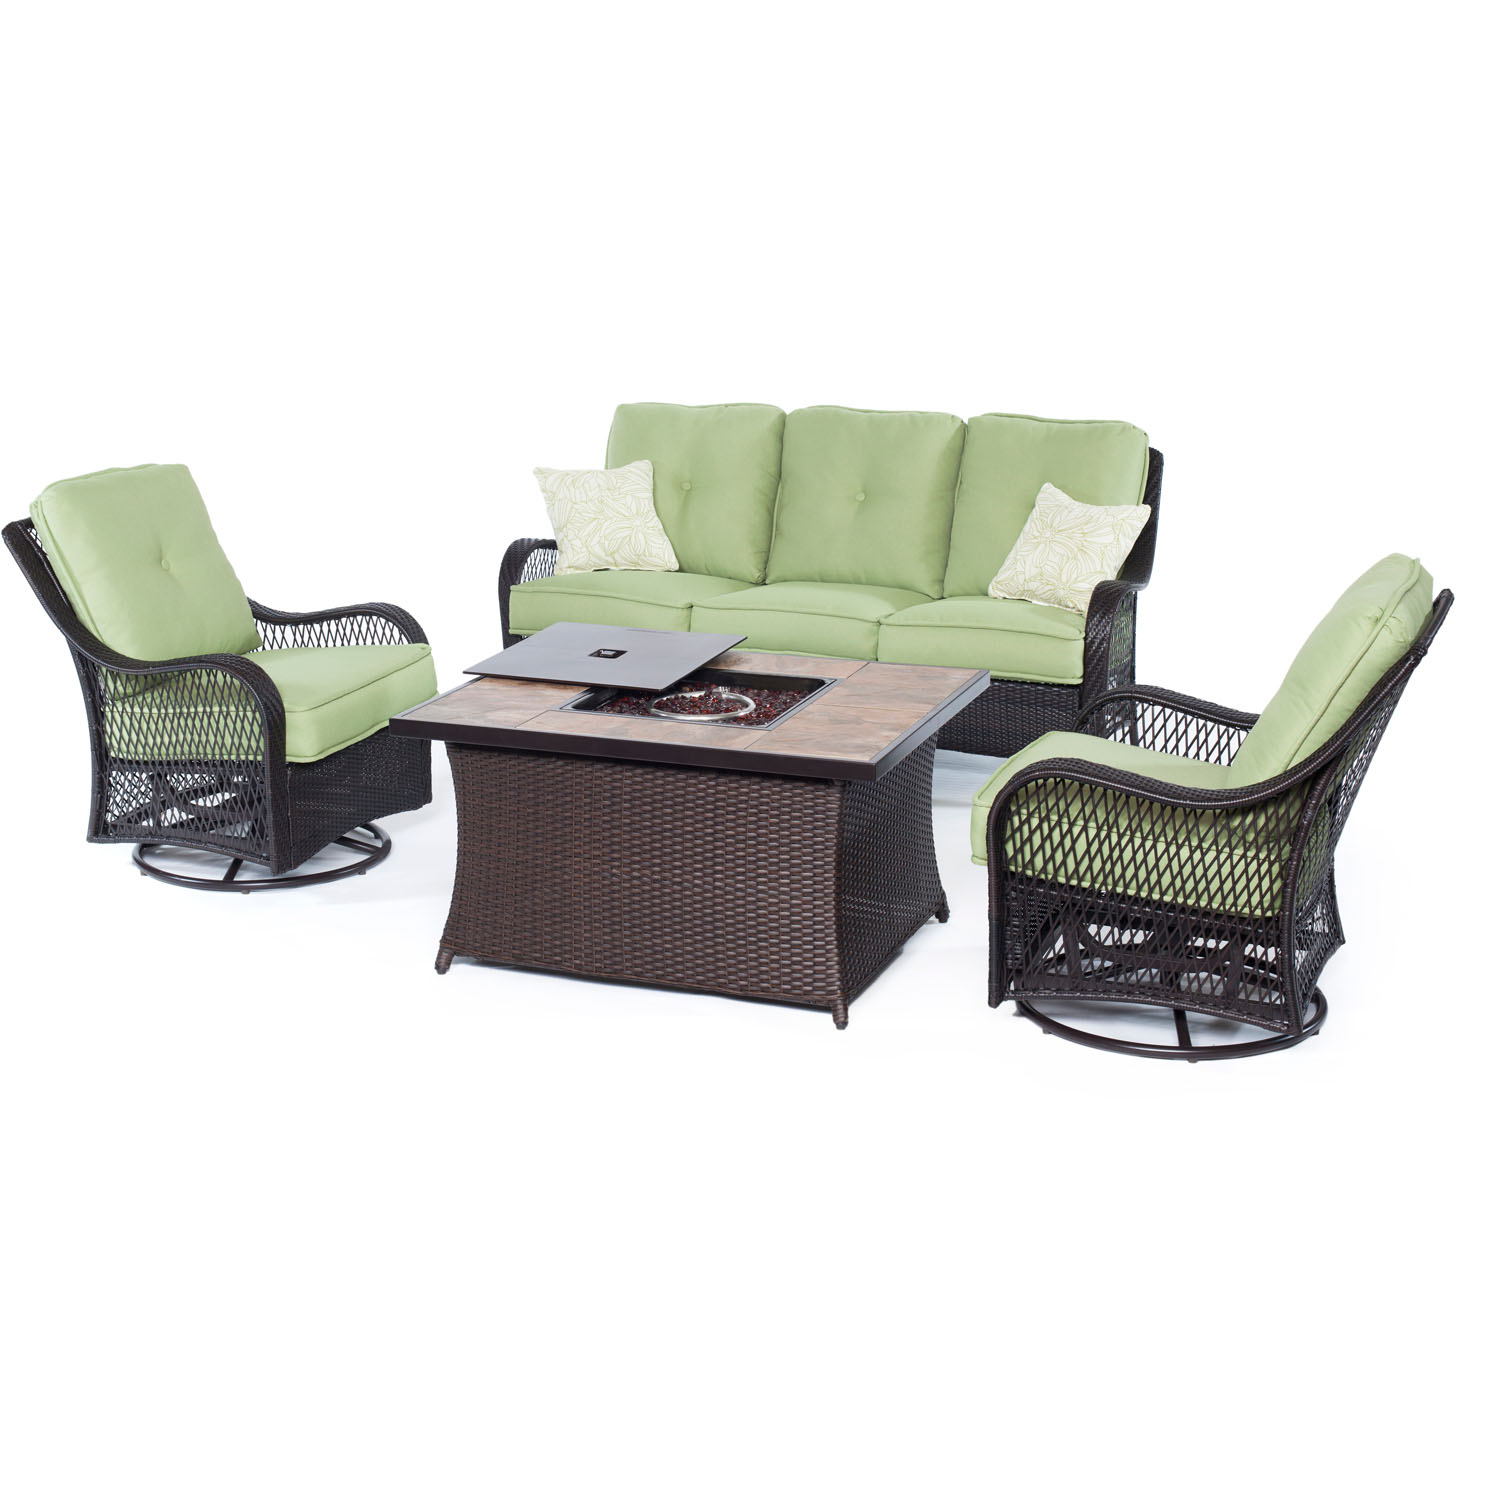 Hanover Orleans 4 Pcs Wicker Propane Fire Pit Set, Avocado Green - image 1 of 9